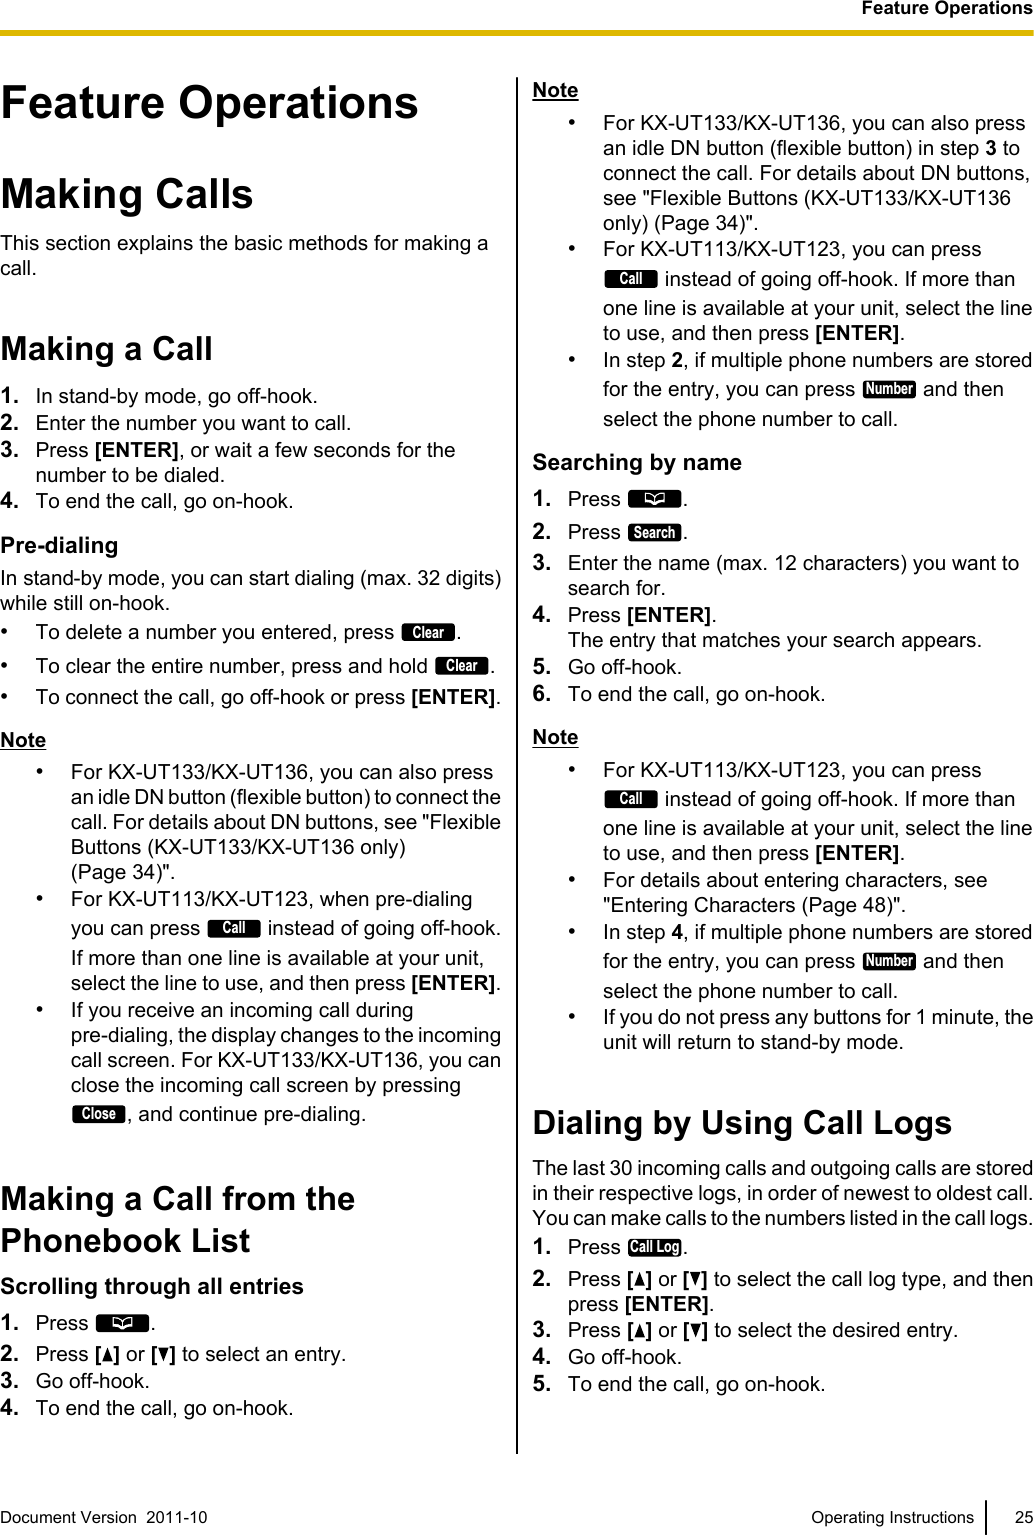 Feature OperationsMaking CallsThis section explains the basic methods for making acall.Making a Call1. In stand-by mode, go off-hook.2. Enter the number you want to call.3. Press [ENTER], or wait a few seconds for thenumber to be dialed.4. To end the call, go on-hook.Pre-dialingIn stand-by mode, you can start dialing (max. 32 digits)while still on-hook.•To delete a number you entered, press Clear.•To clear the entire number, press and hold Clear.•To connect the call, go off-hook or press [ENTER].Note•For KX-UT133/KX-UT136, you can also pressan idle DN button (flexible button) to connect thecall. For details about DN buttons, see &quot;FlexibleButtons (KX-UT133/KX-UT136 only)(Page 34)&quot;.•For KX-UT113/KX-UT123, when pre-dialingyou can press Call instead of going off-hook.If more than one line is available at your unit,select the line to use, and then press [ENTER].•If you receive an incoming call duringpre-dialing, the display changes to the incomingcall screen. For KX-UT133/KX-UT136, you canclose the incoming call screen by pressingClose, and continue pre-dialing.Making a Call from thePhonebook ListScrolling through all entries1. Press  .2. Press [ ] or [ ] to select an entry.3. Go off-hook.4. To end the call, go on-hook.Note•For KX-UT133/KX-UT136, you can also pressan idle DN button (flexible button) in step 3 toconnect the call. For details about DN buttons,see &quot;Flexible Buttons (KX-UT133/KX-UT136only) (Page 34)&quot;.•For KX-UT113/KX-UT123, you can pressCall instead of going off-hook. If more thanone line is available at your unit, select the lineto use, and then press [ENTER].•In step 2, if multiple phone numbers are storedfor the entry, you can press Number and thenselect the phone number to call.Searching by name1. Press  .2. Press Search.3. Enter the name (max. 12 characters) you want tosearch for.4. Press [ENTER].The entry that matches your search appears.5. Go off-hook.6. To end the call, go on-hook.Note•For KX-UT113/KX-UT123, you can pressCall instead of going off-hook. If more thanone line is available at your unit, select the lineto use, and then press [ENTER].•For details about entering characters, see&quot;Entering Characters (Page 48)&quot;.•In step 4, if multiple phone numbers are storedfor the entry, you can press Number and thenselect the phone number to call.•If you do not press any buttons for 1 minute, theunit will return to stand-by mode.Dialing by Using Call LogsThe last 30 incoming calls and outgoing calls are storedin their respective logs, in order of newest to oldest call.You can make calls to the numbers listed in the call logs.1. Press Call Log.2. Press [ ] or [ ] to select the call log type, and thenpress [ENTER].3. Press [ ] or [ ] to select the desired entry.4. Go off-hook.5. To end the call, go on-hook.Document Version  2011-10   Operating Instructions 25Feature Operations